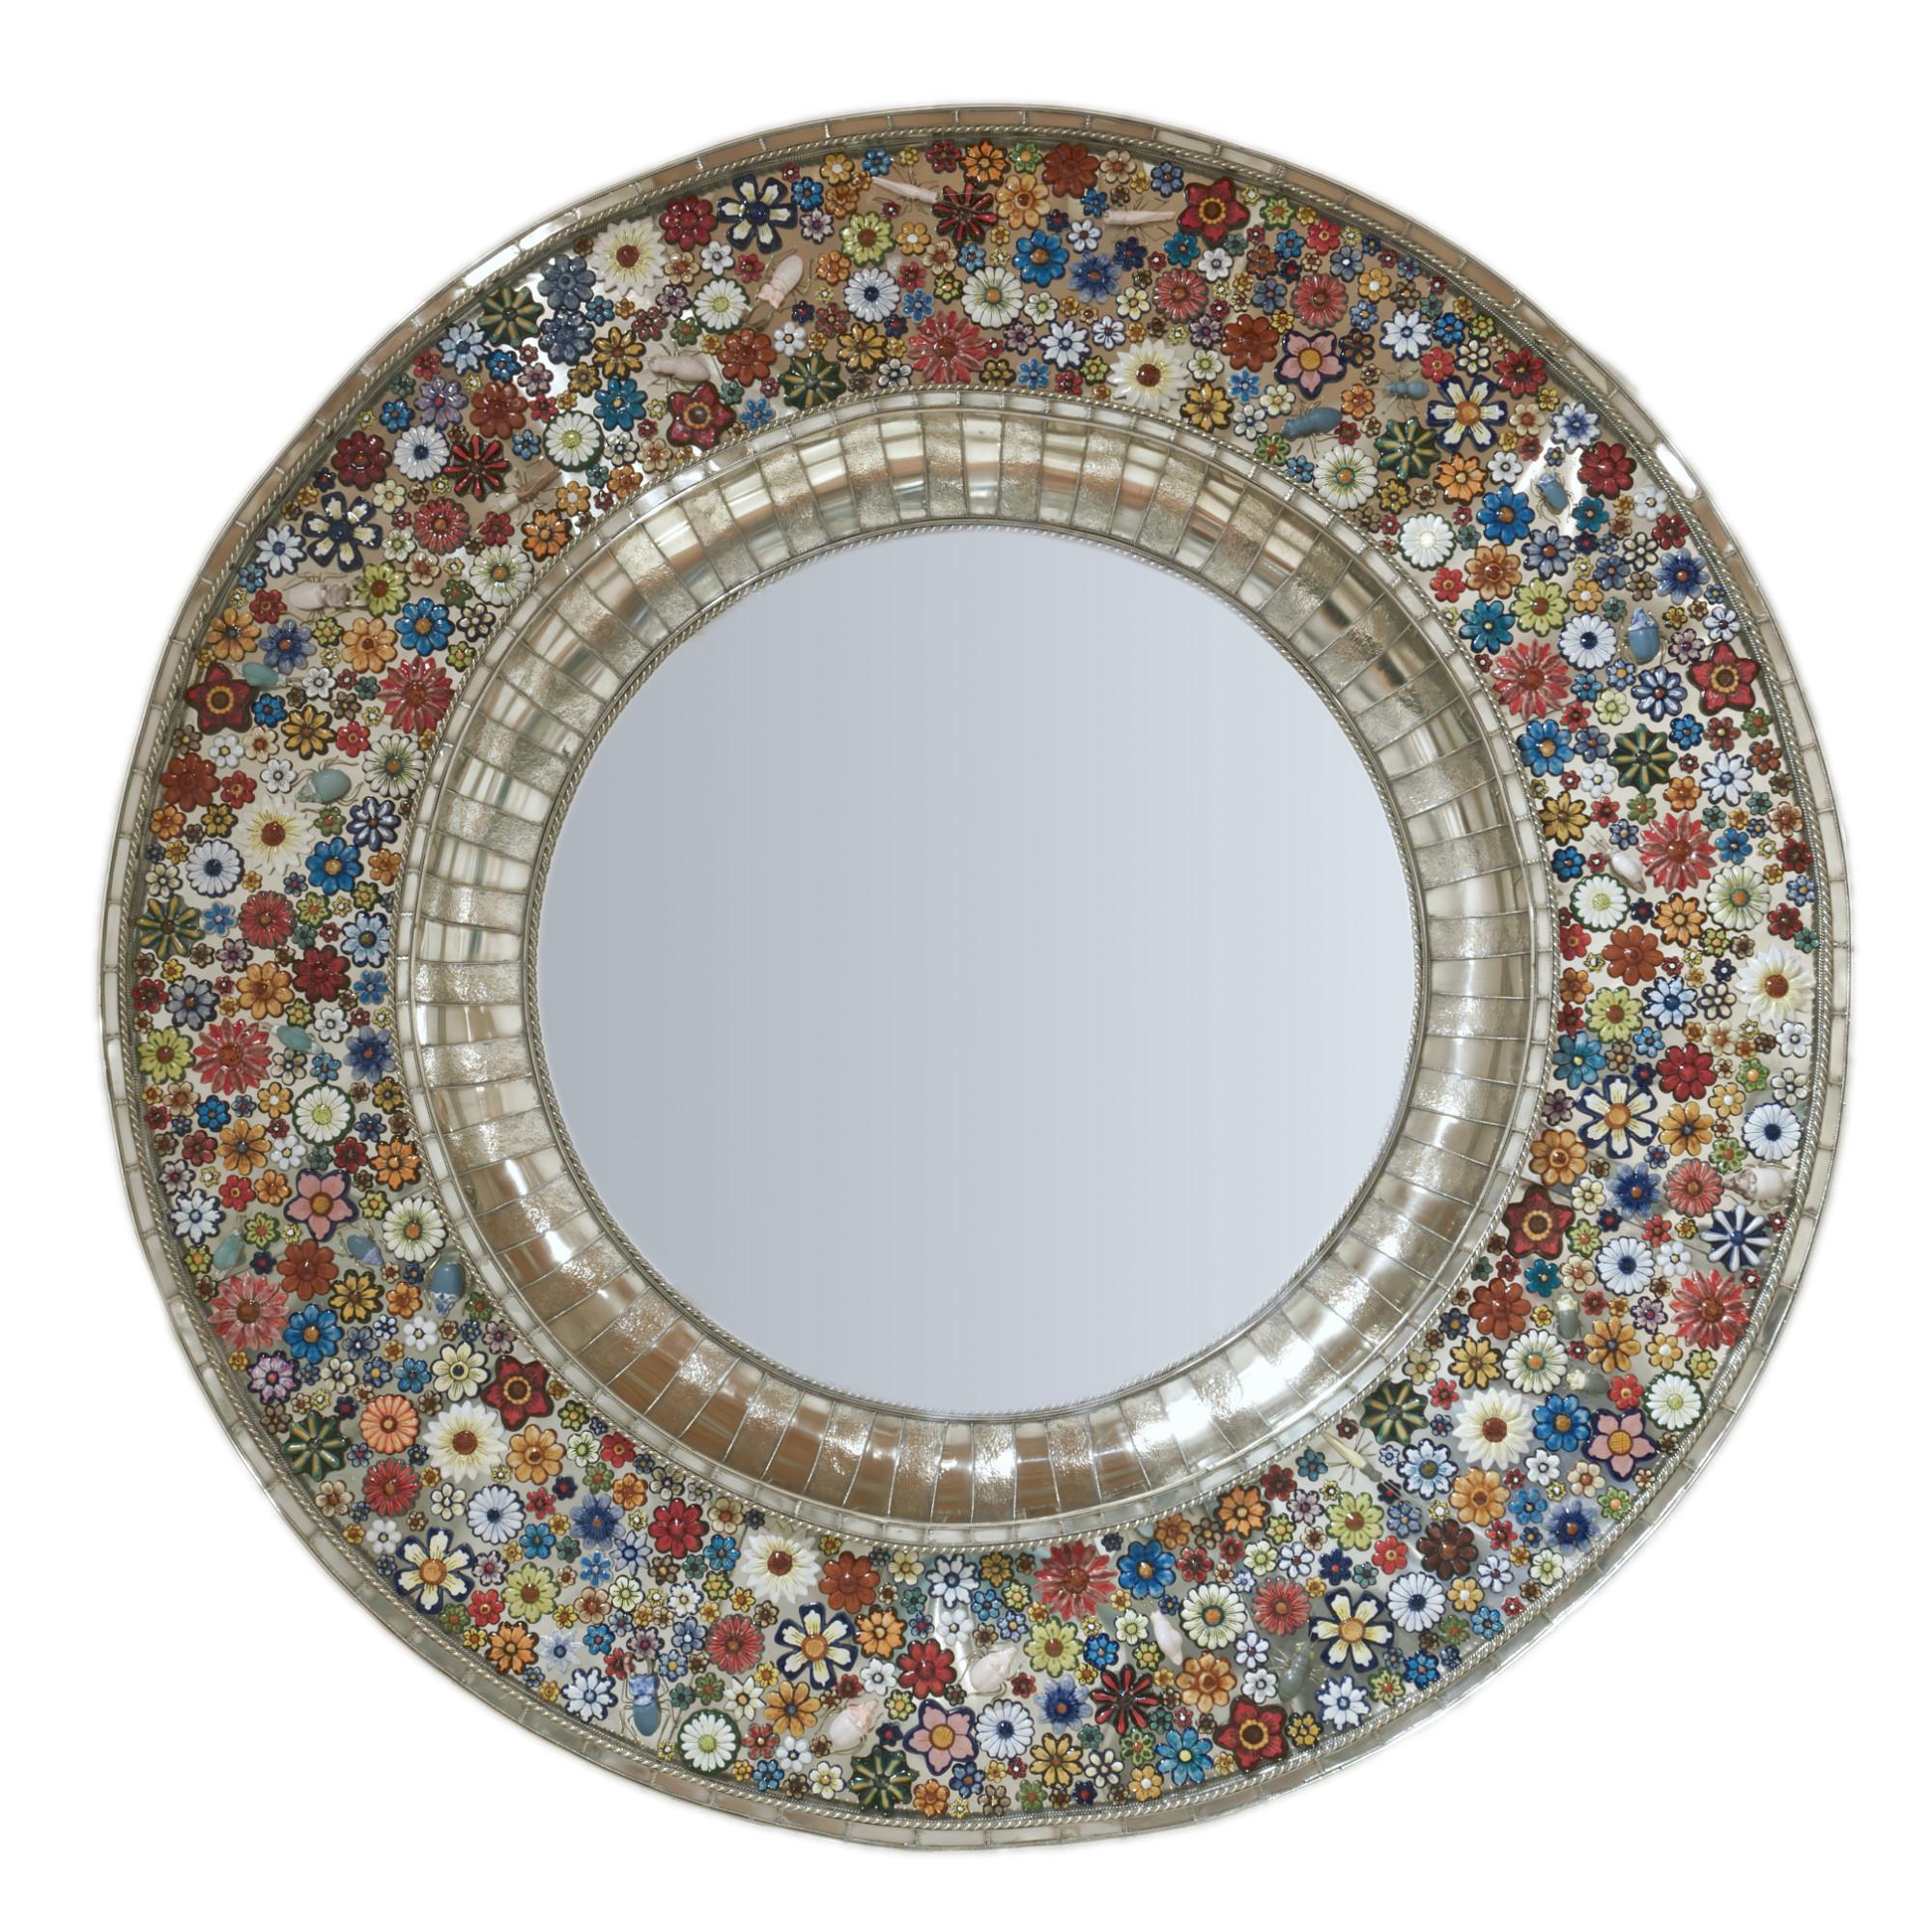 Roundy Convex Mirror, Hand Painted Ceramic Flowers and Insects over White Metal 3